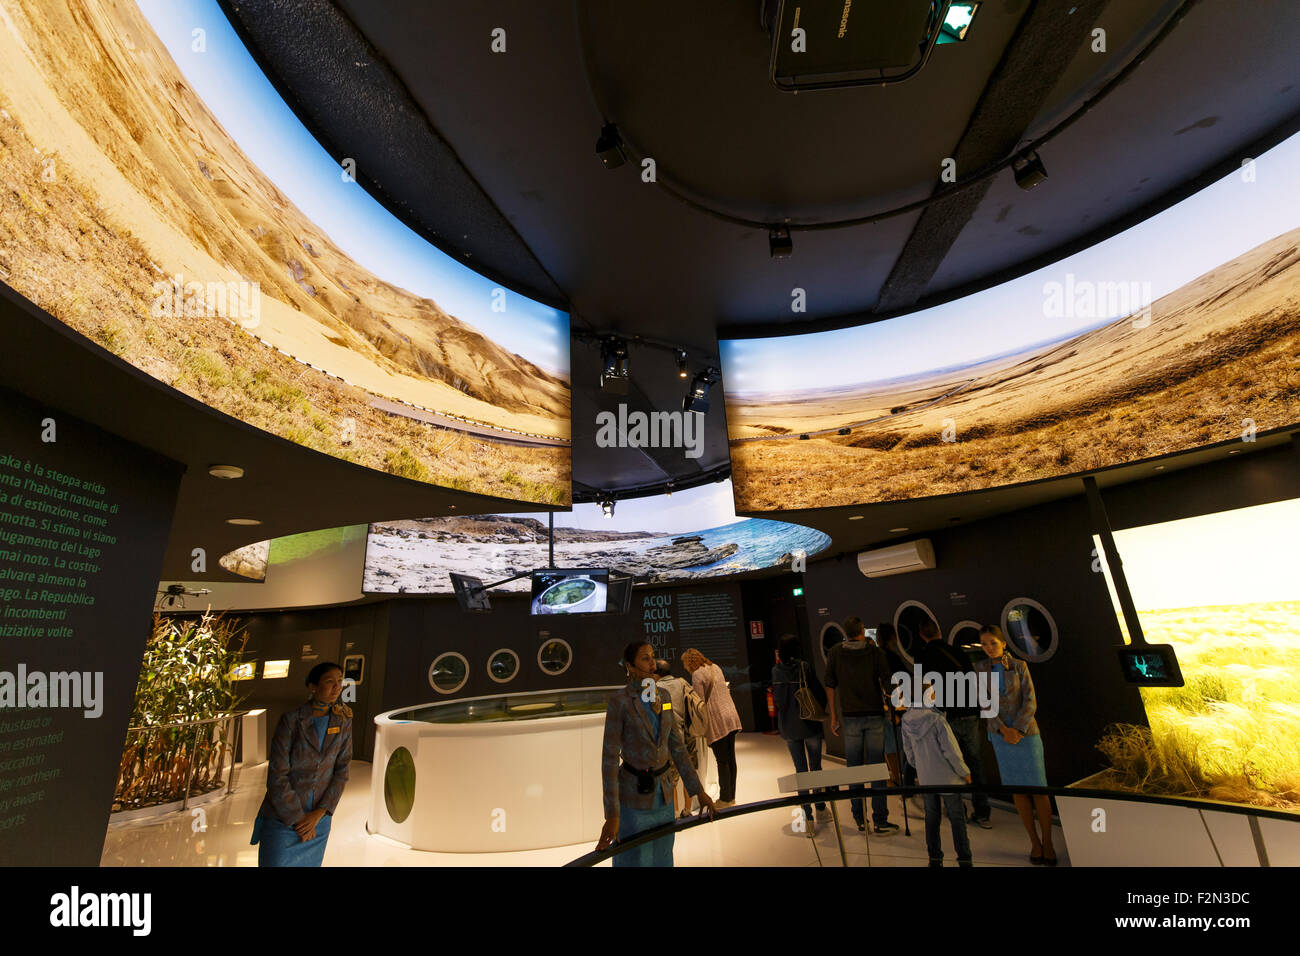 Milan, Italy, 13 September 2015: Detail of the inside Kazakhstan pavilion at the exhibition Expo 2015 Italy. Stock Photo